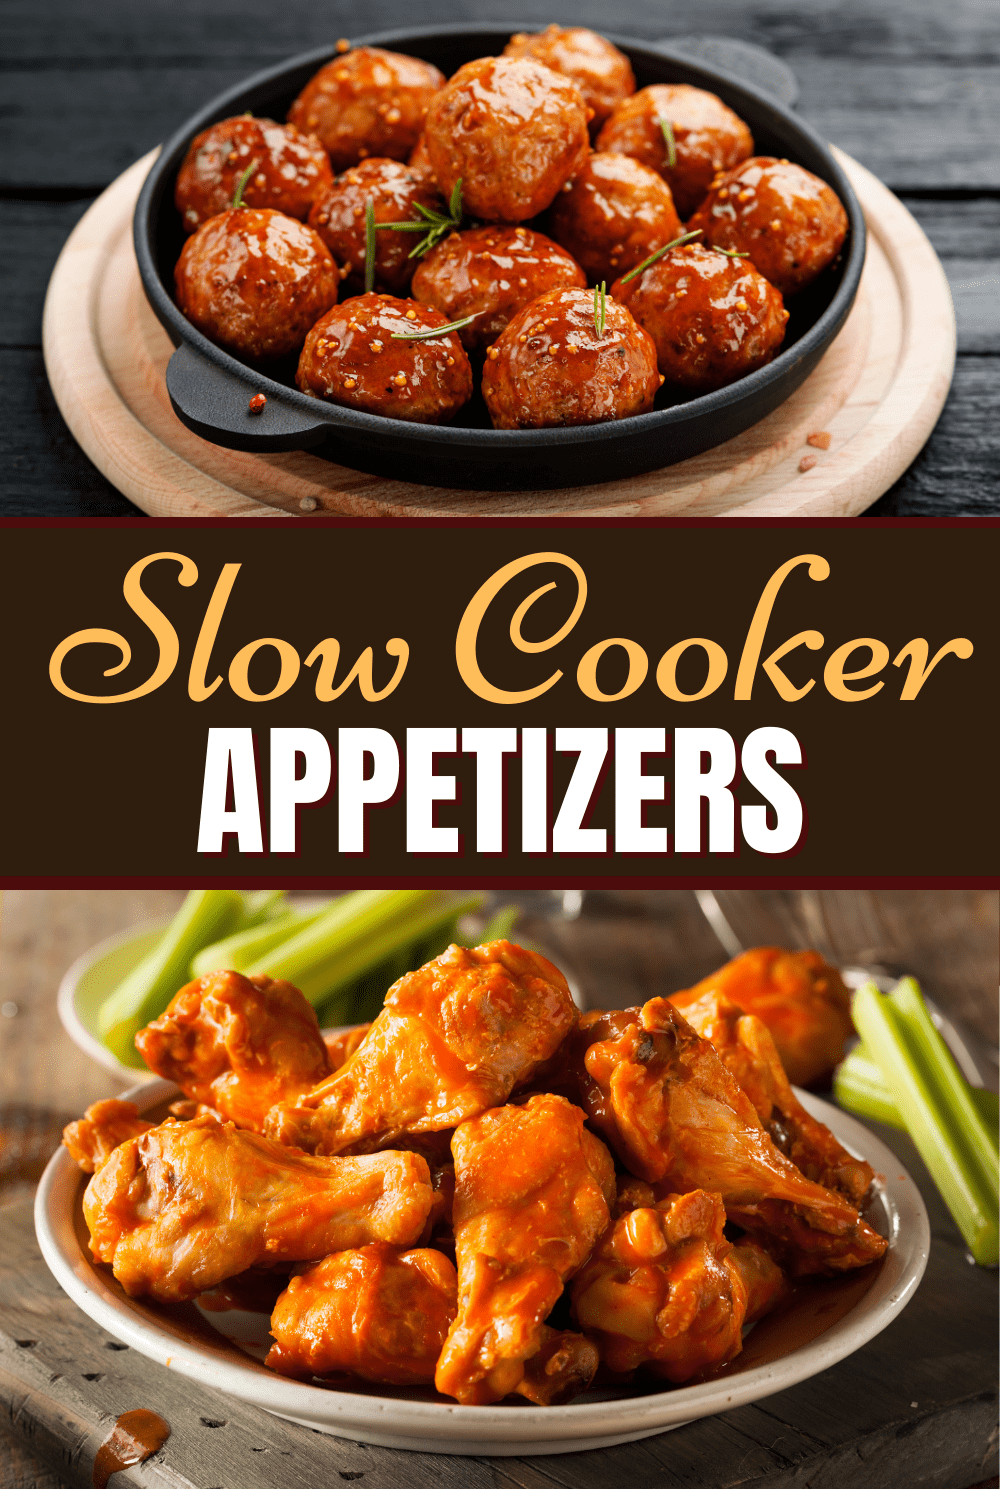 Slow Cooker Appetizers Unique 23 Easy Slow Cooker Appetizers Insanely Good